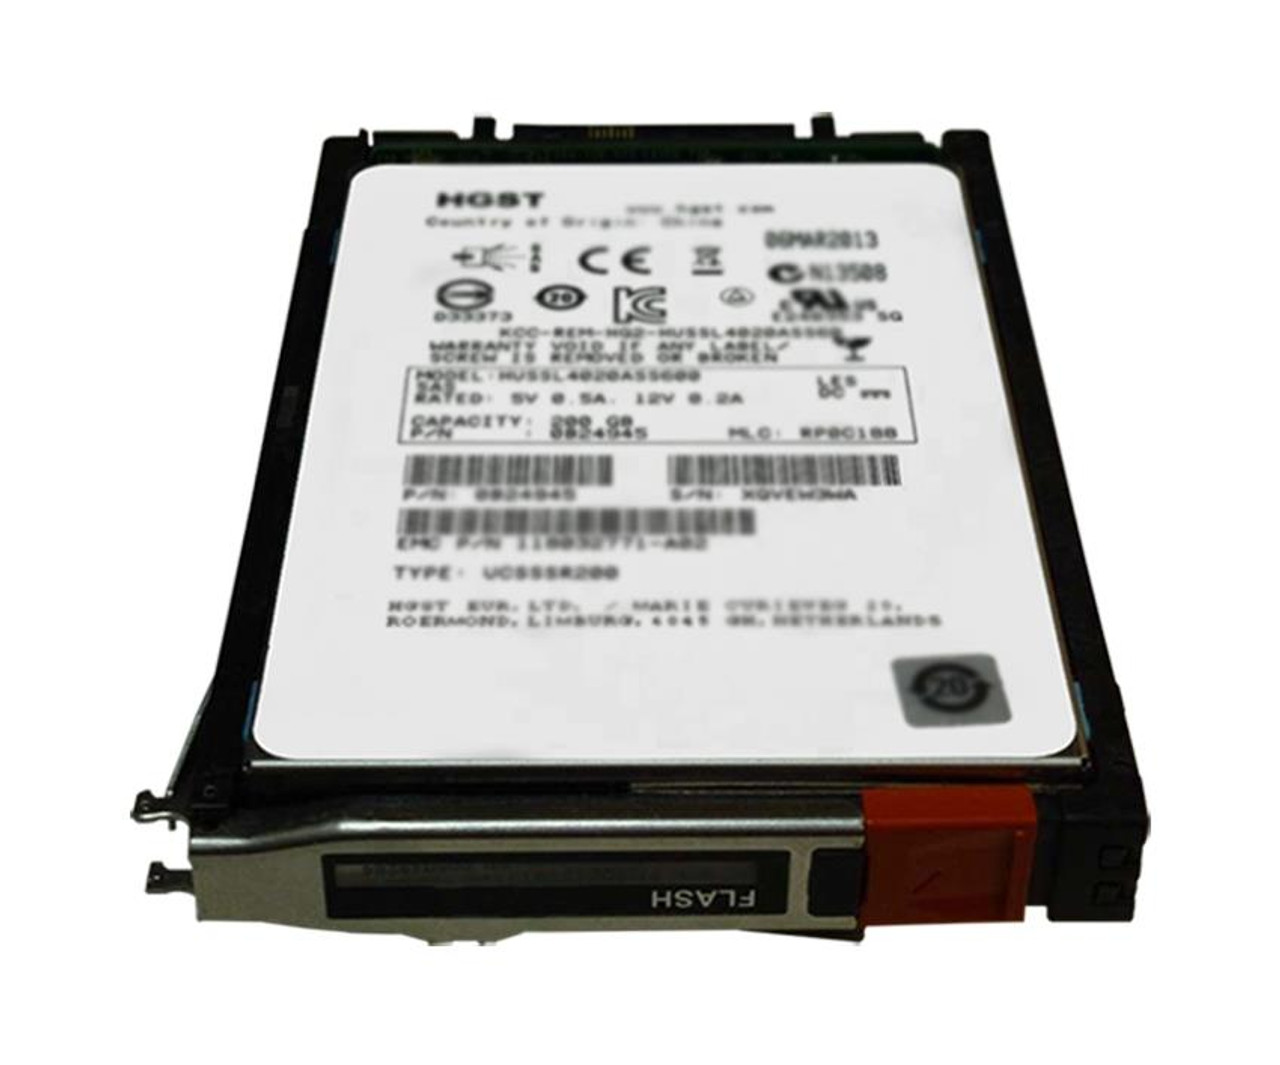 005051134 EMC 400GB SAS 6Gbps EFD 2.5-inch Internal Solid State Drive (SSD) with Tray for VNX5200 5400 5600 5800 7600 8000 Storage Systems